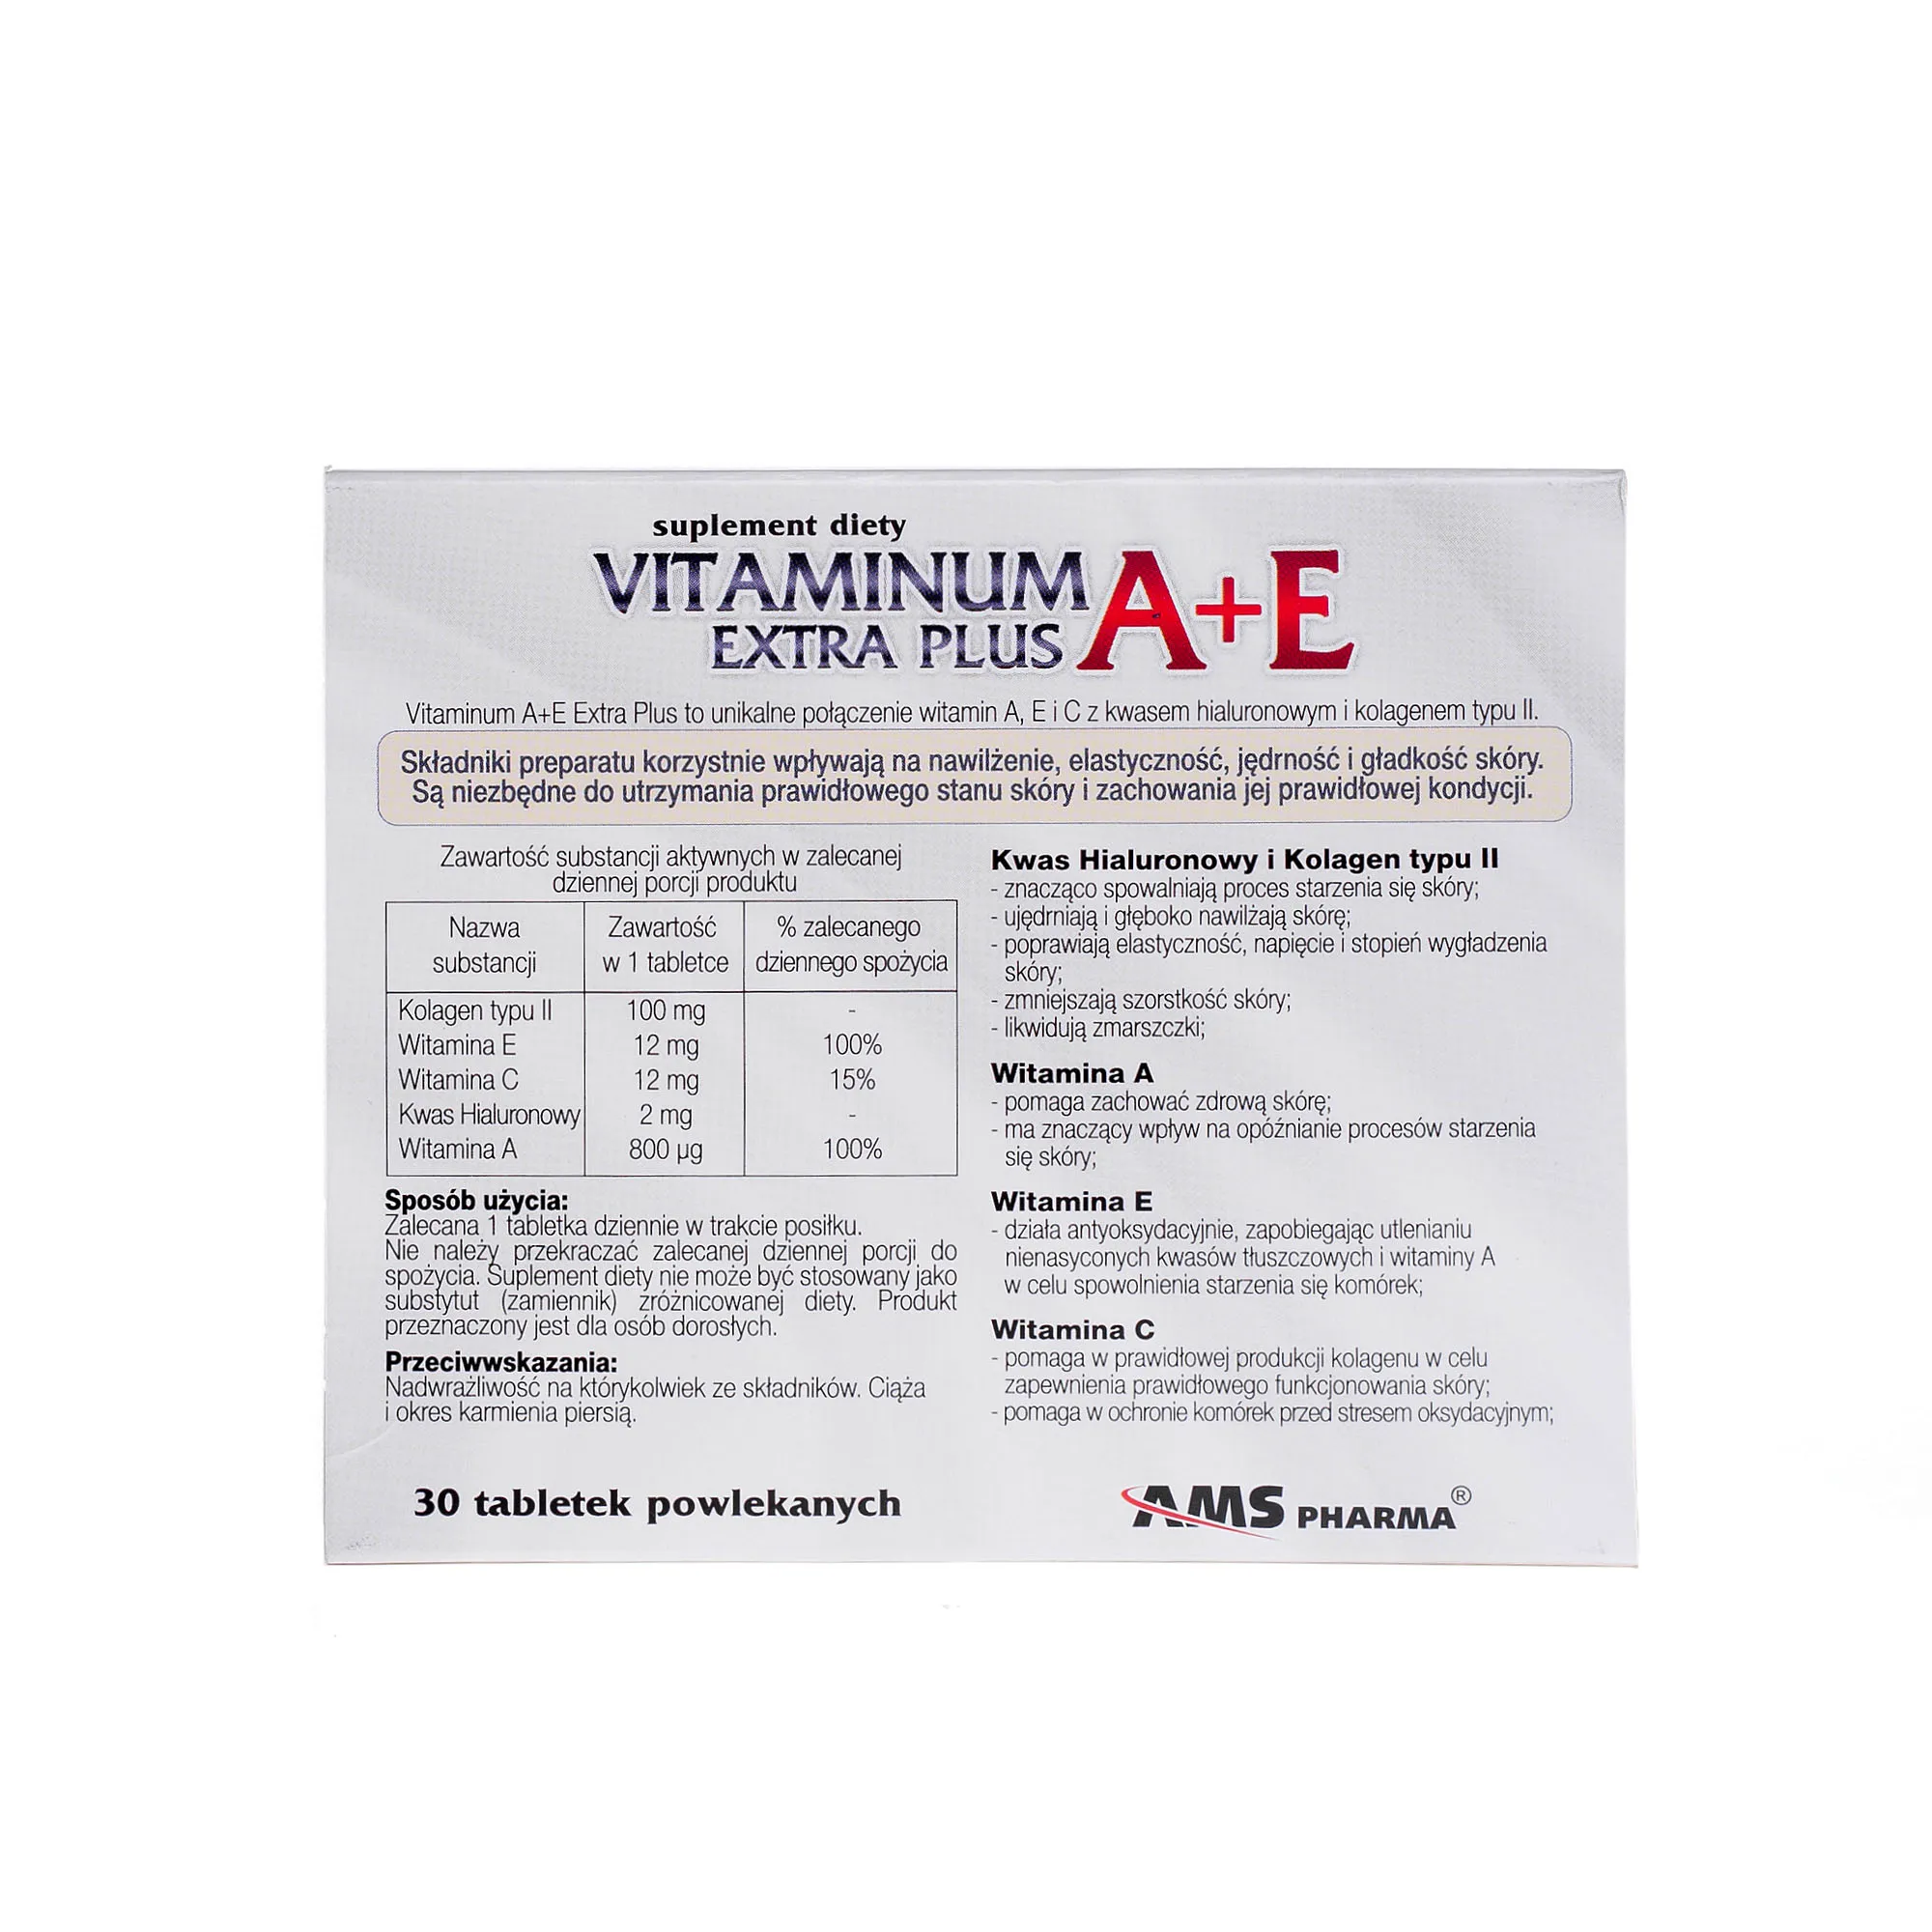 Witaminum A+E Extra Plus, suplement diety, 30 tabletek powlekanych 